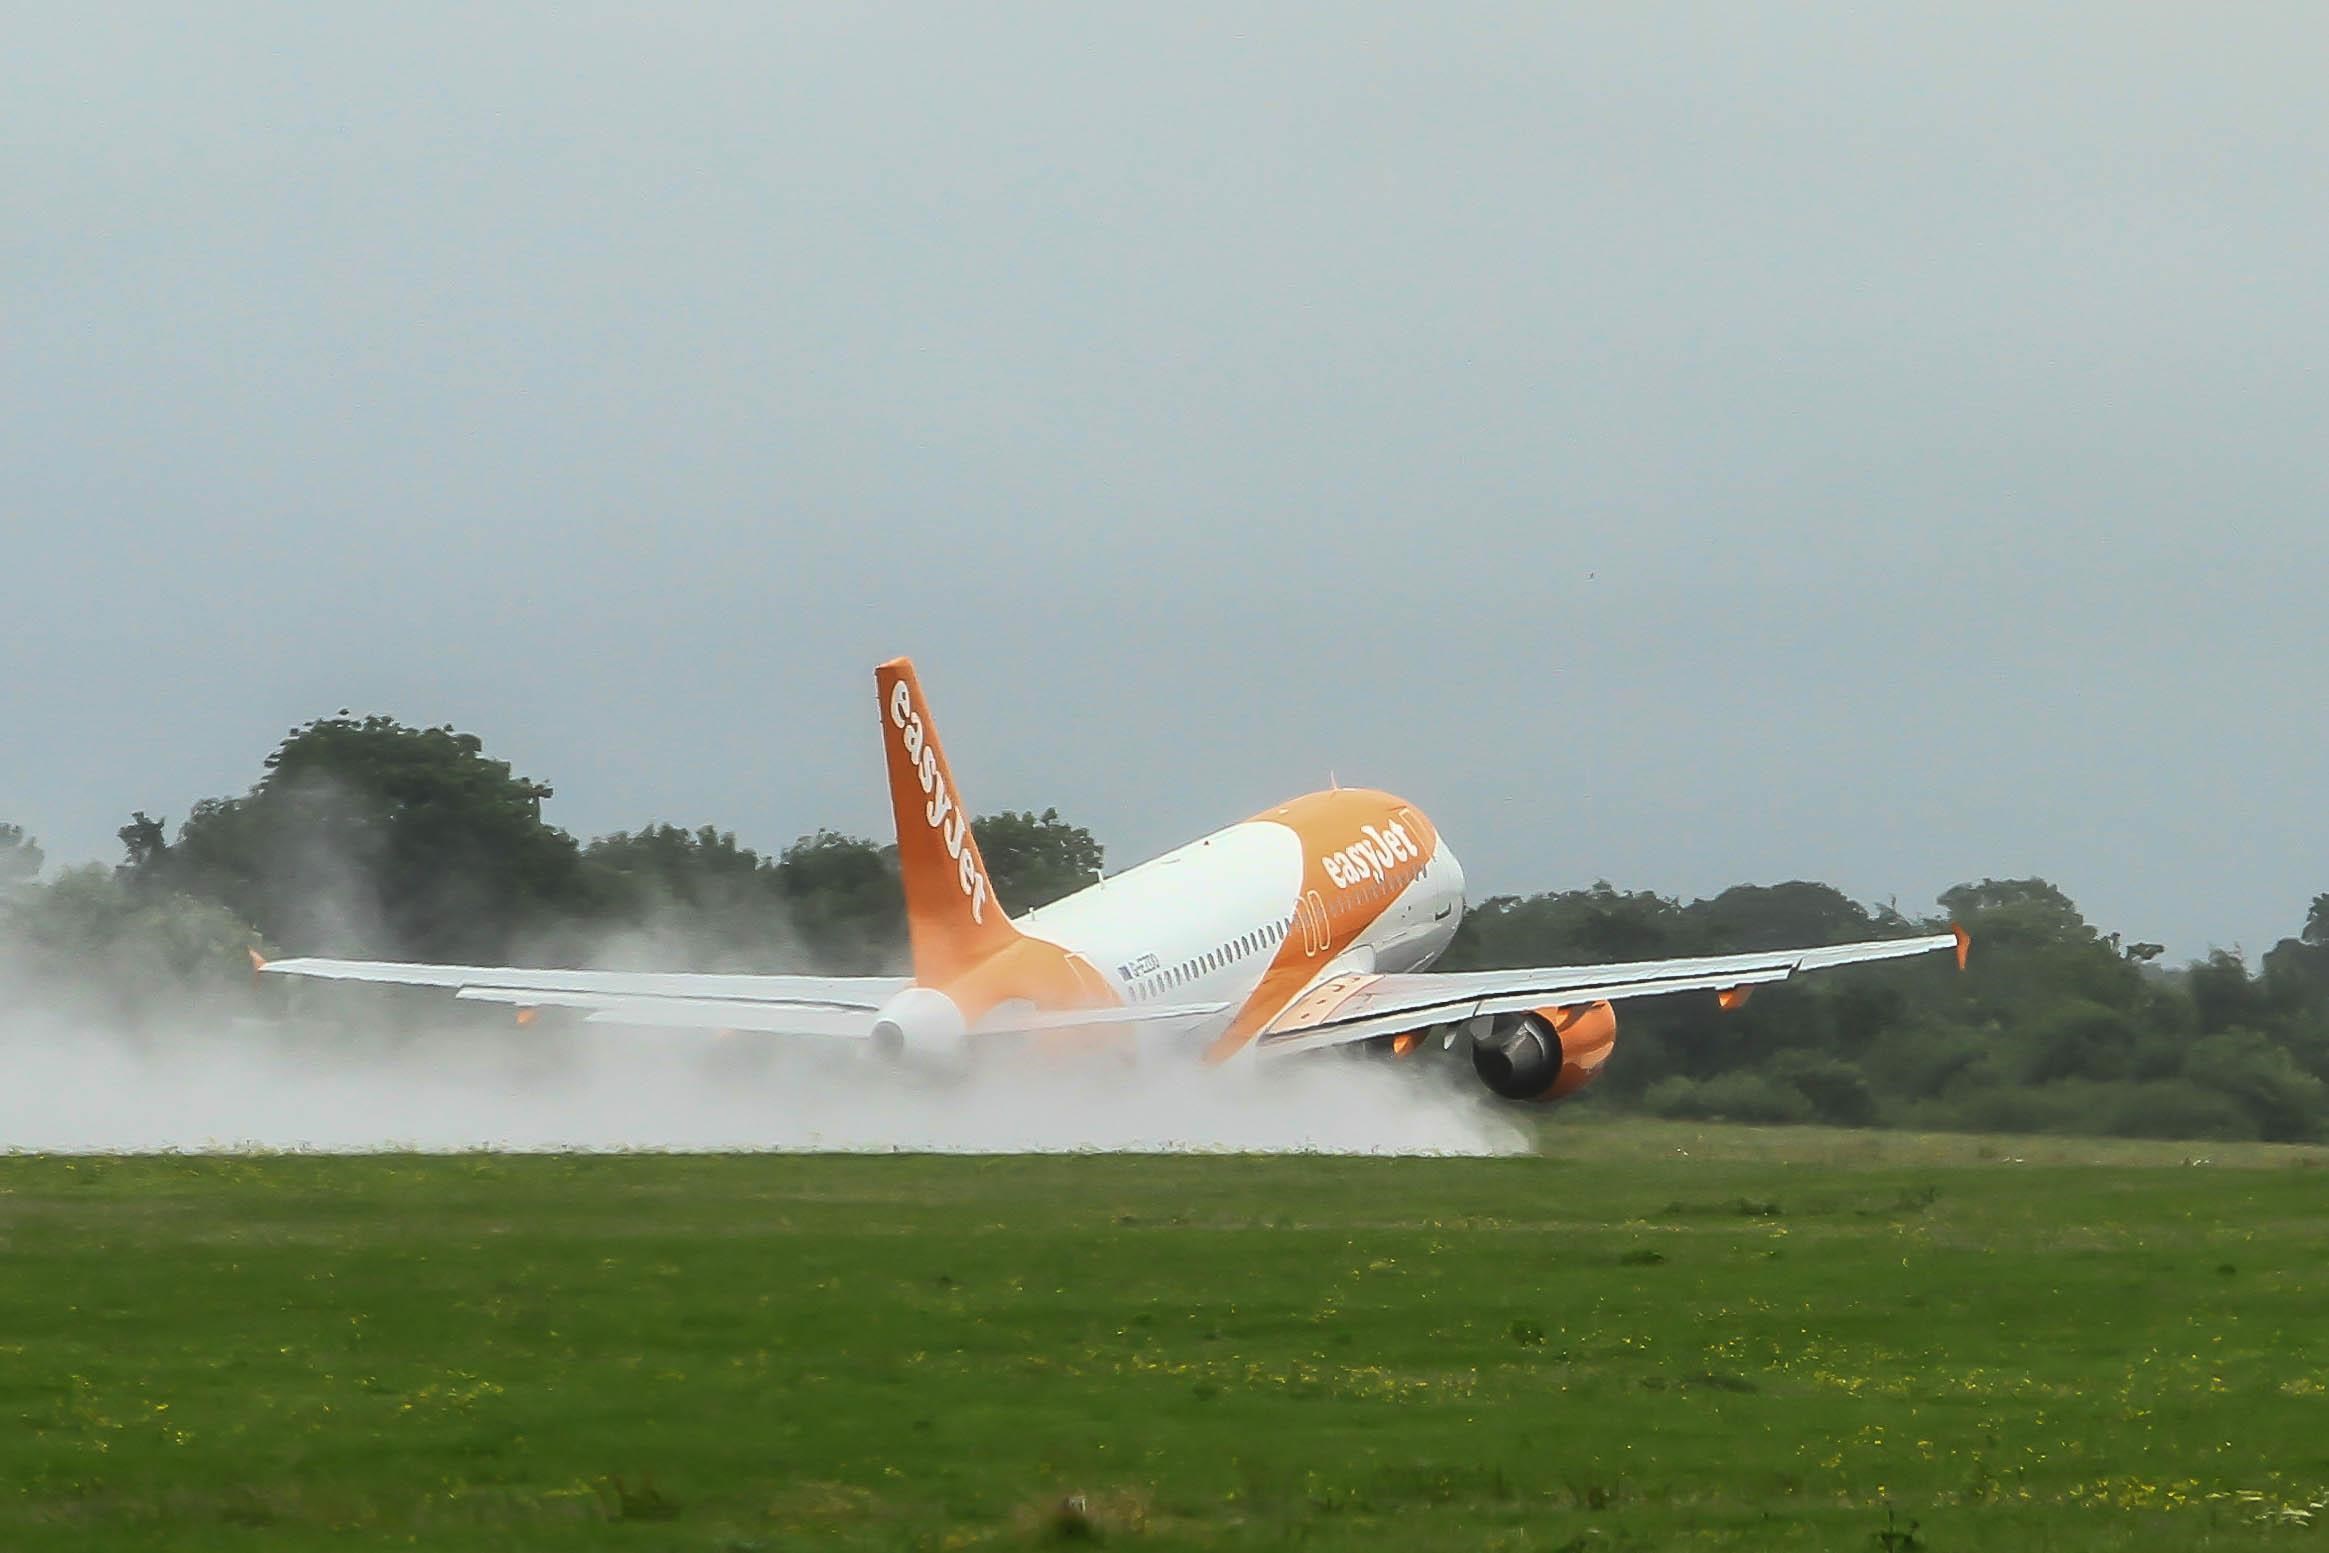 Belfast International Airport remains open for runway operations